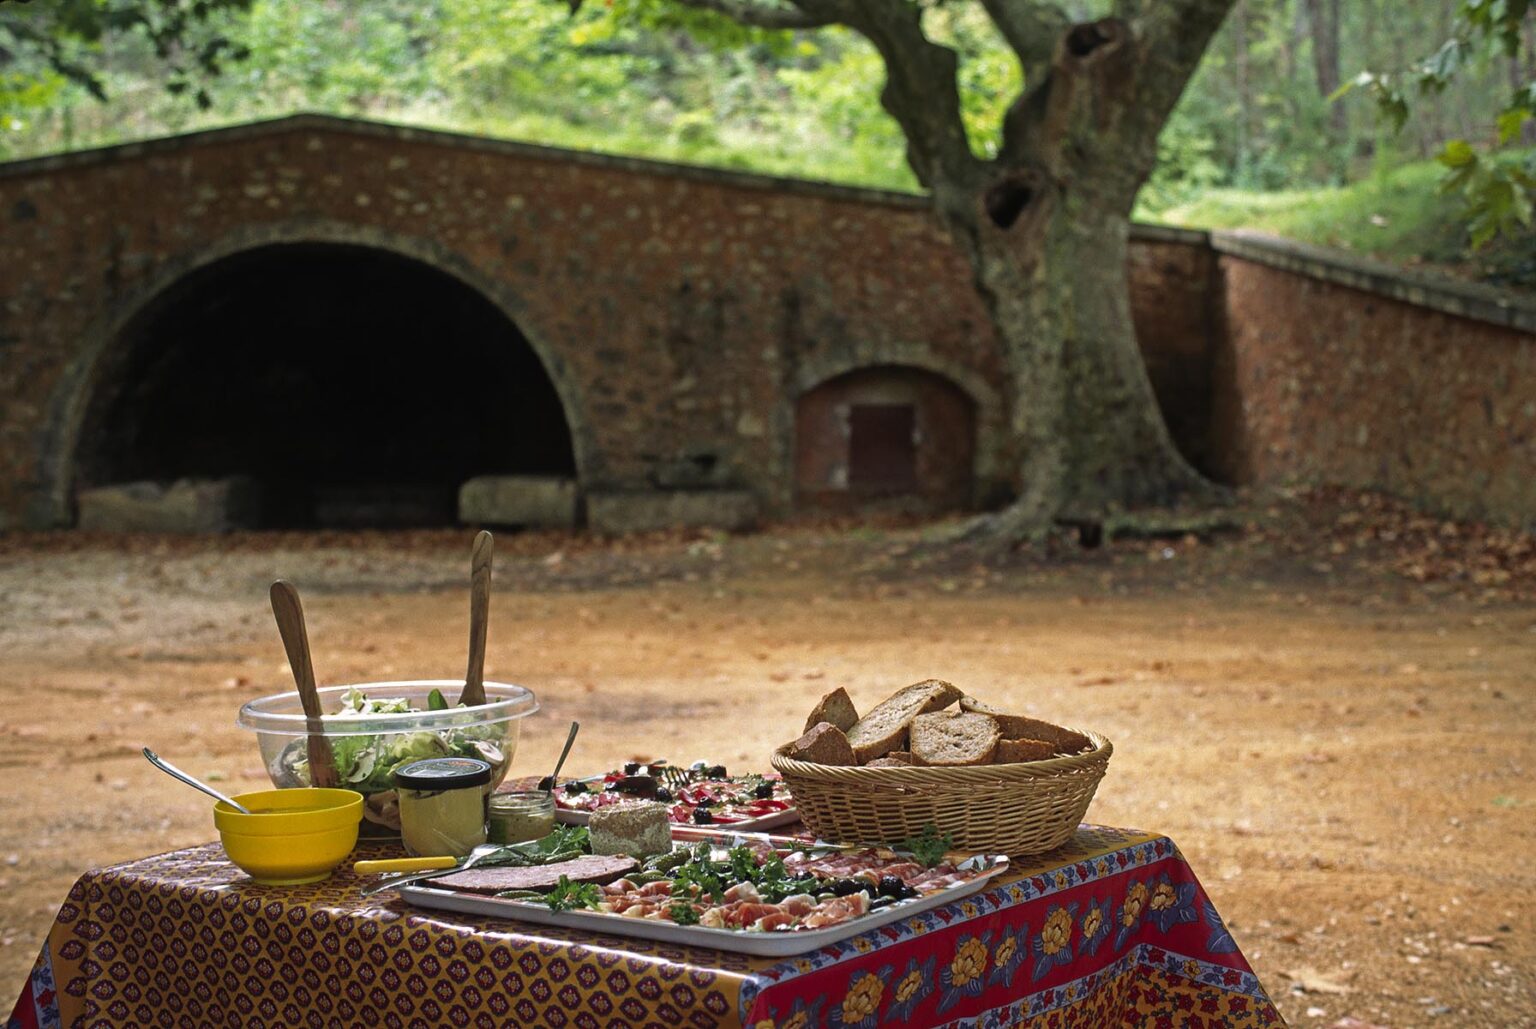 Gourmet Picnic of salads, cold cuts & fresh baked bread - PROVENCE, FRANCE